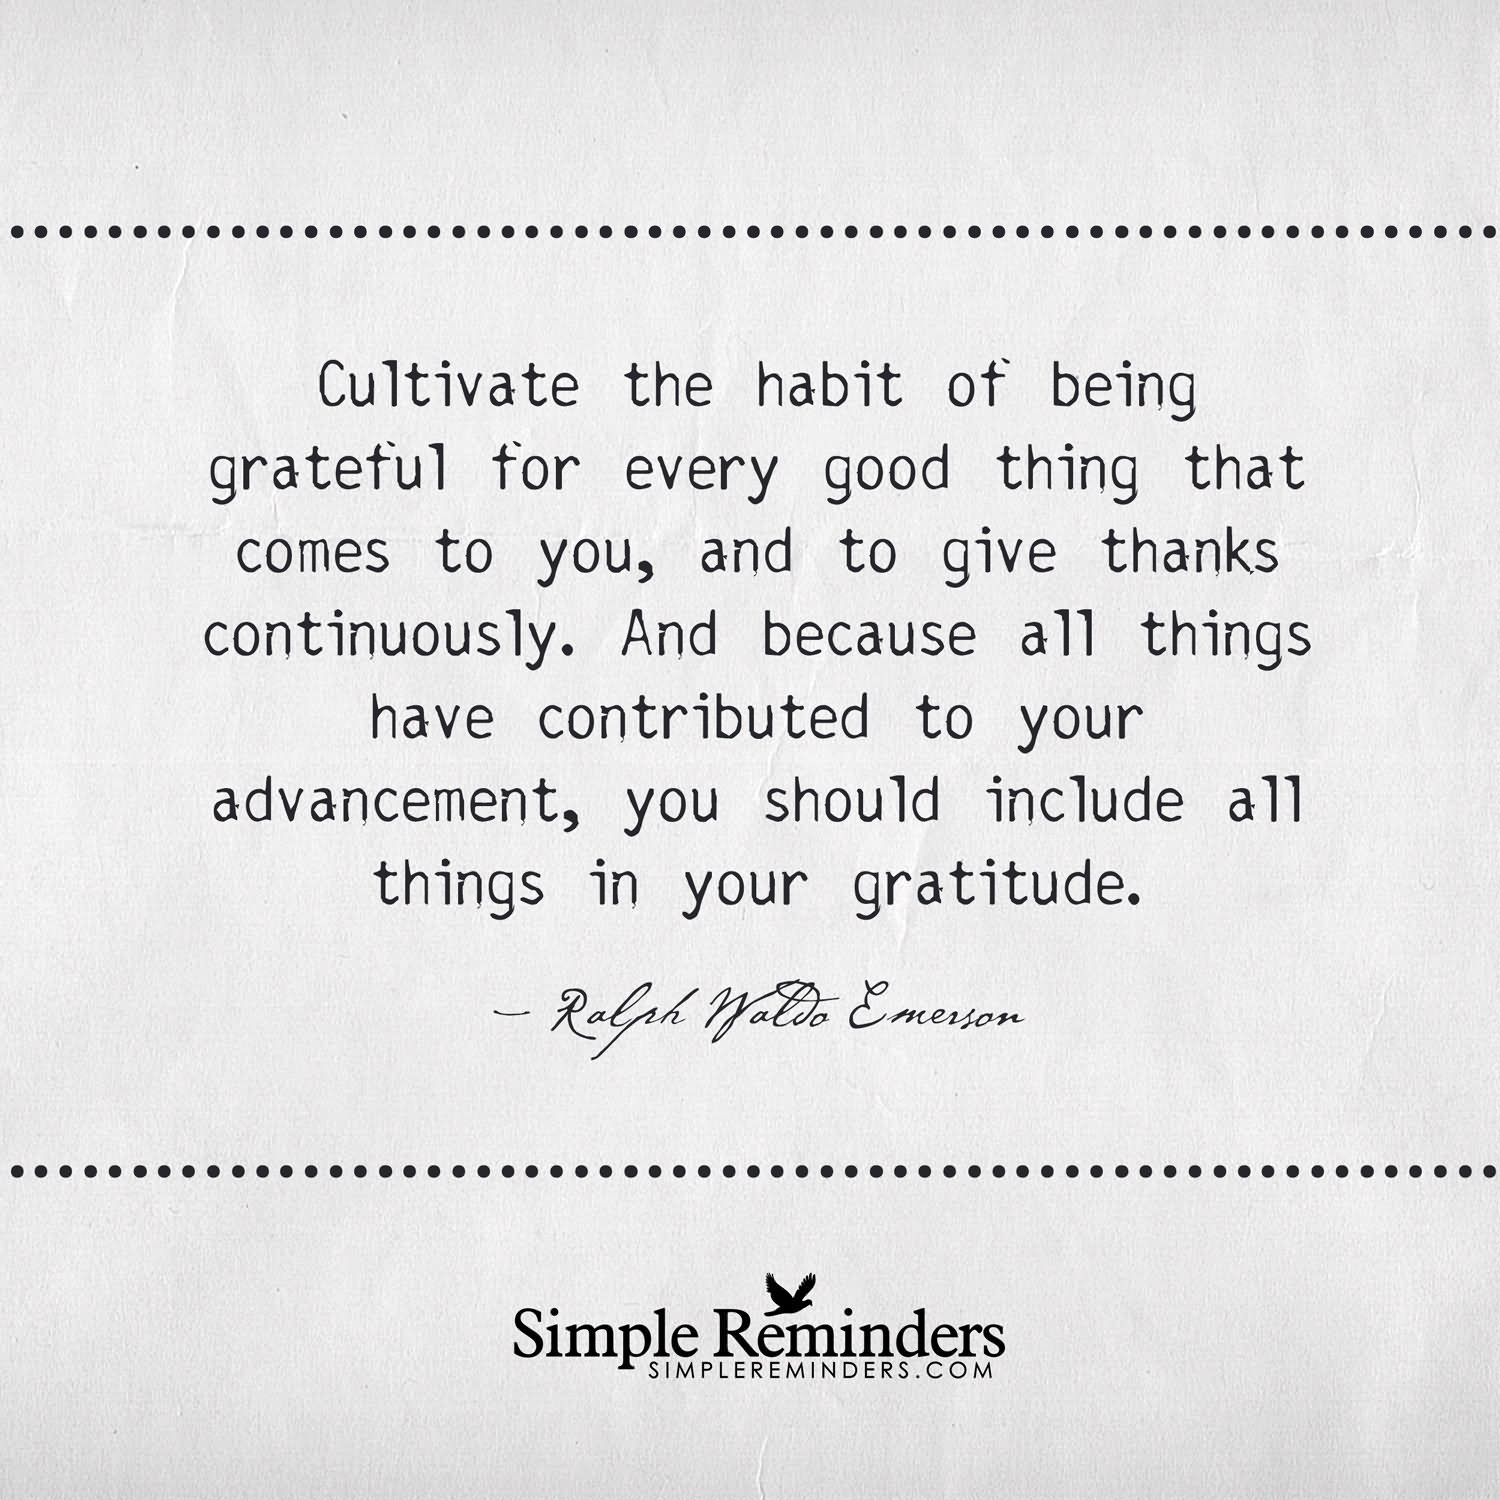 Cultivate the habit of being grateful for every good thing that comes to you, and to give thanks continuously. And because all things have contributed to your advancement